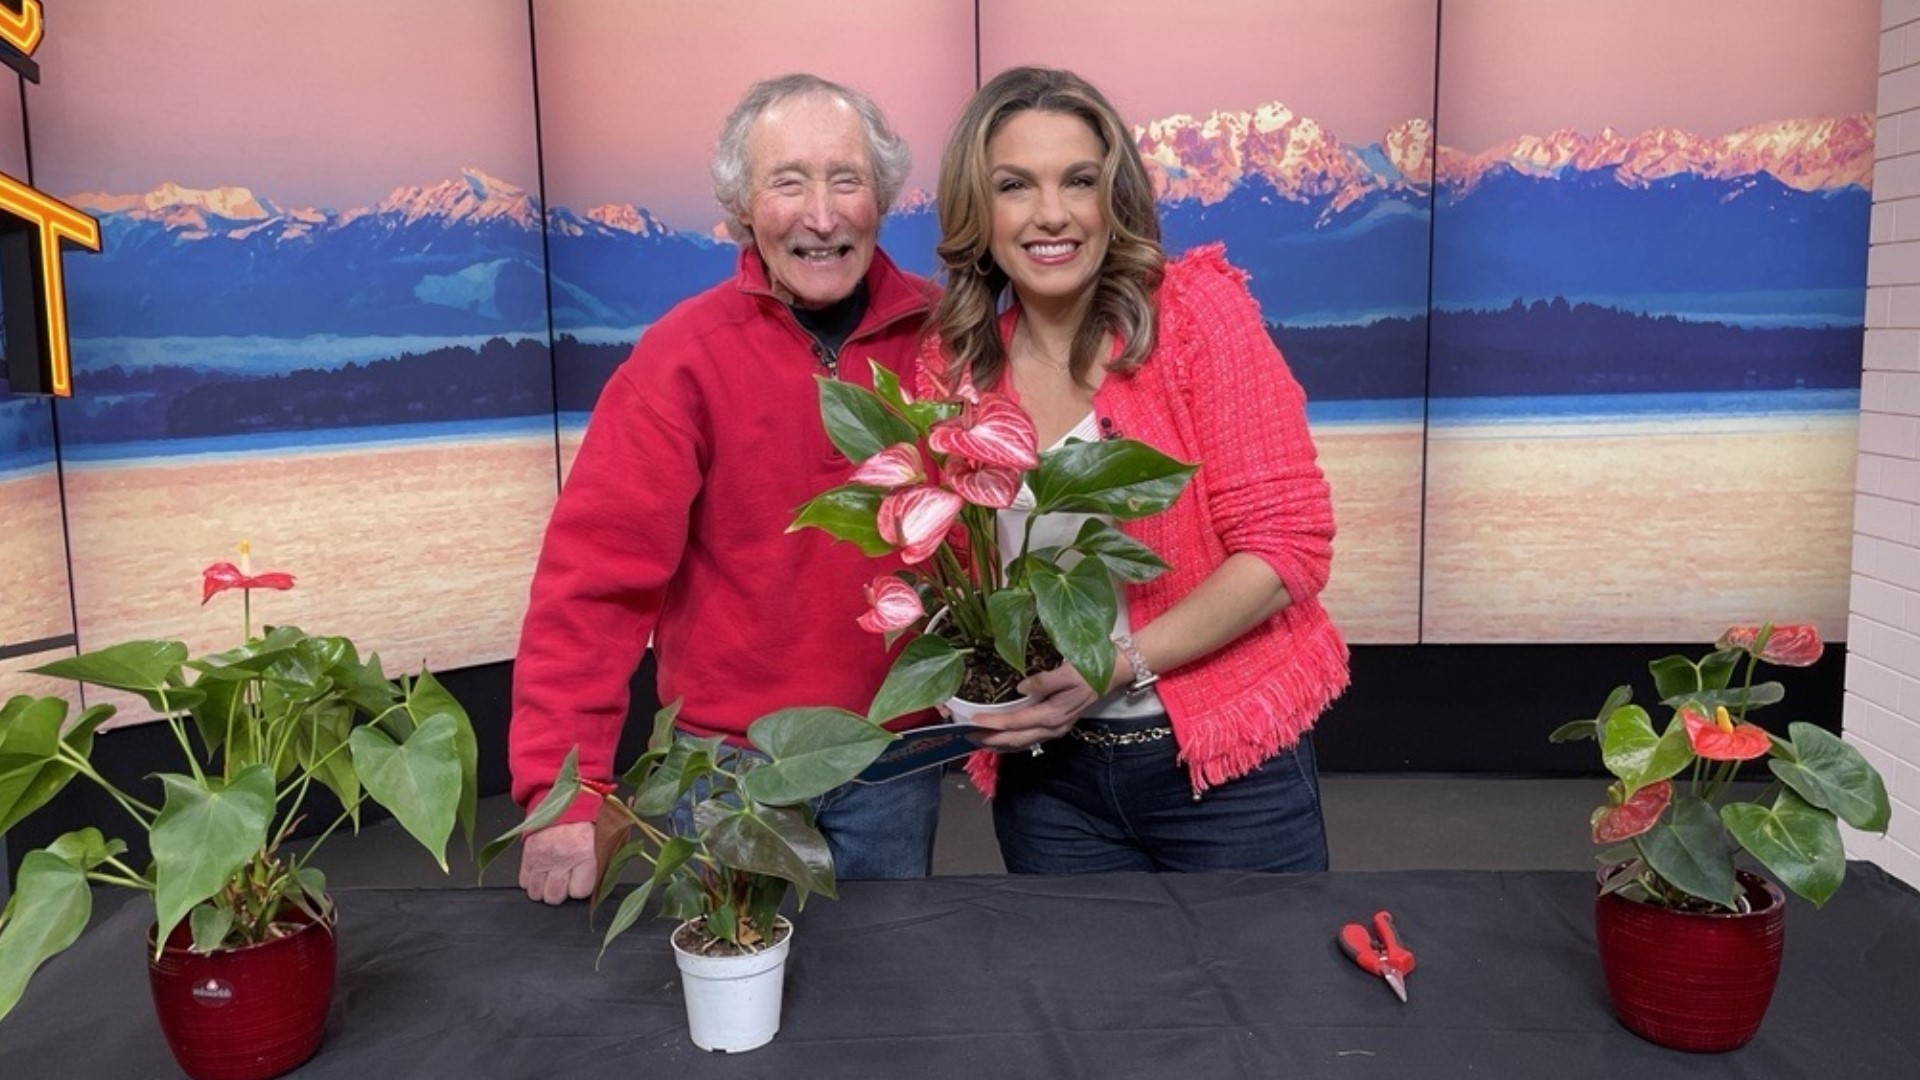 Gardener Ciscoe Morris says the anthurium, or flamingo plant, needs bright indirect light and an occasional misting. #newdaynw